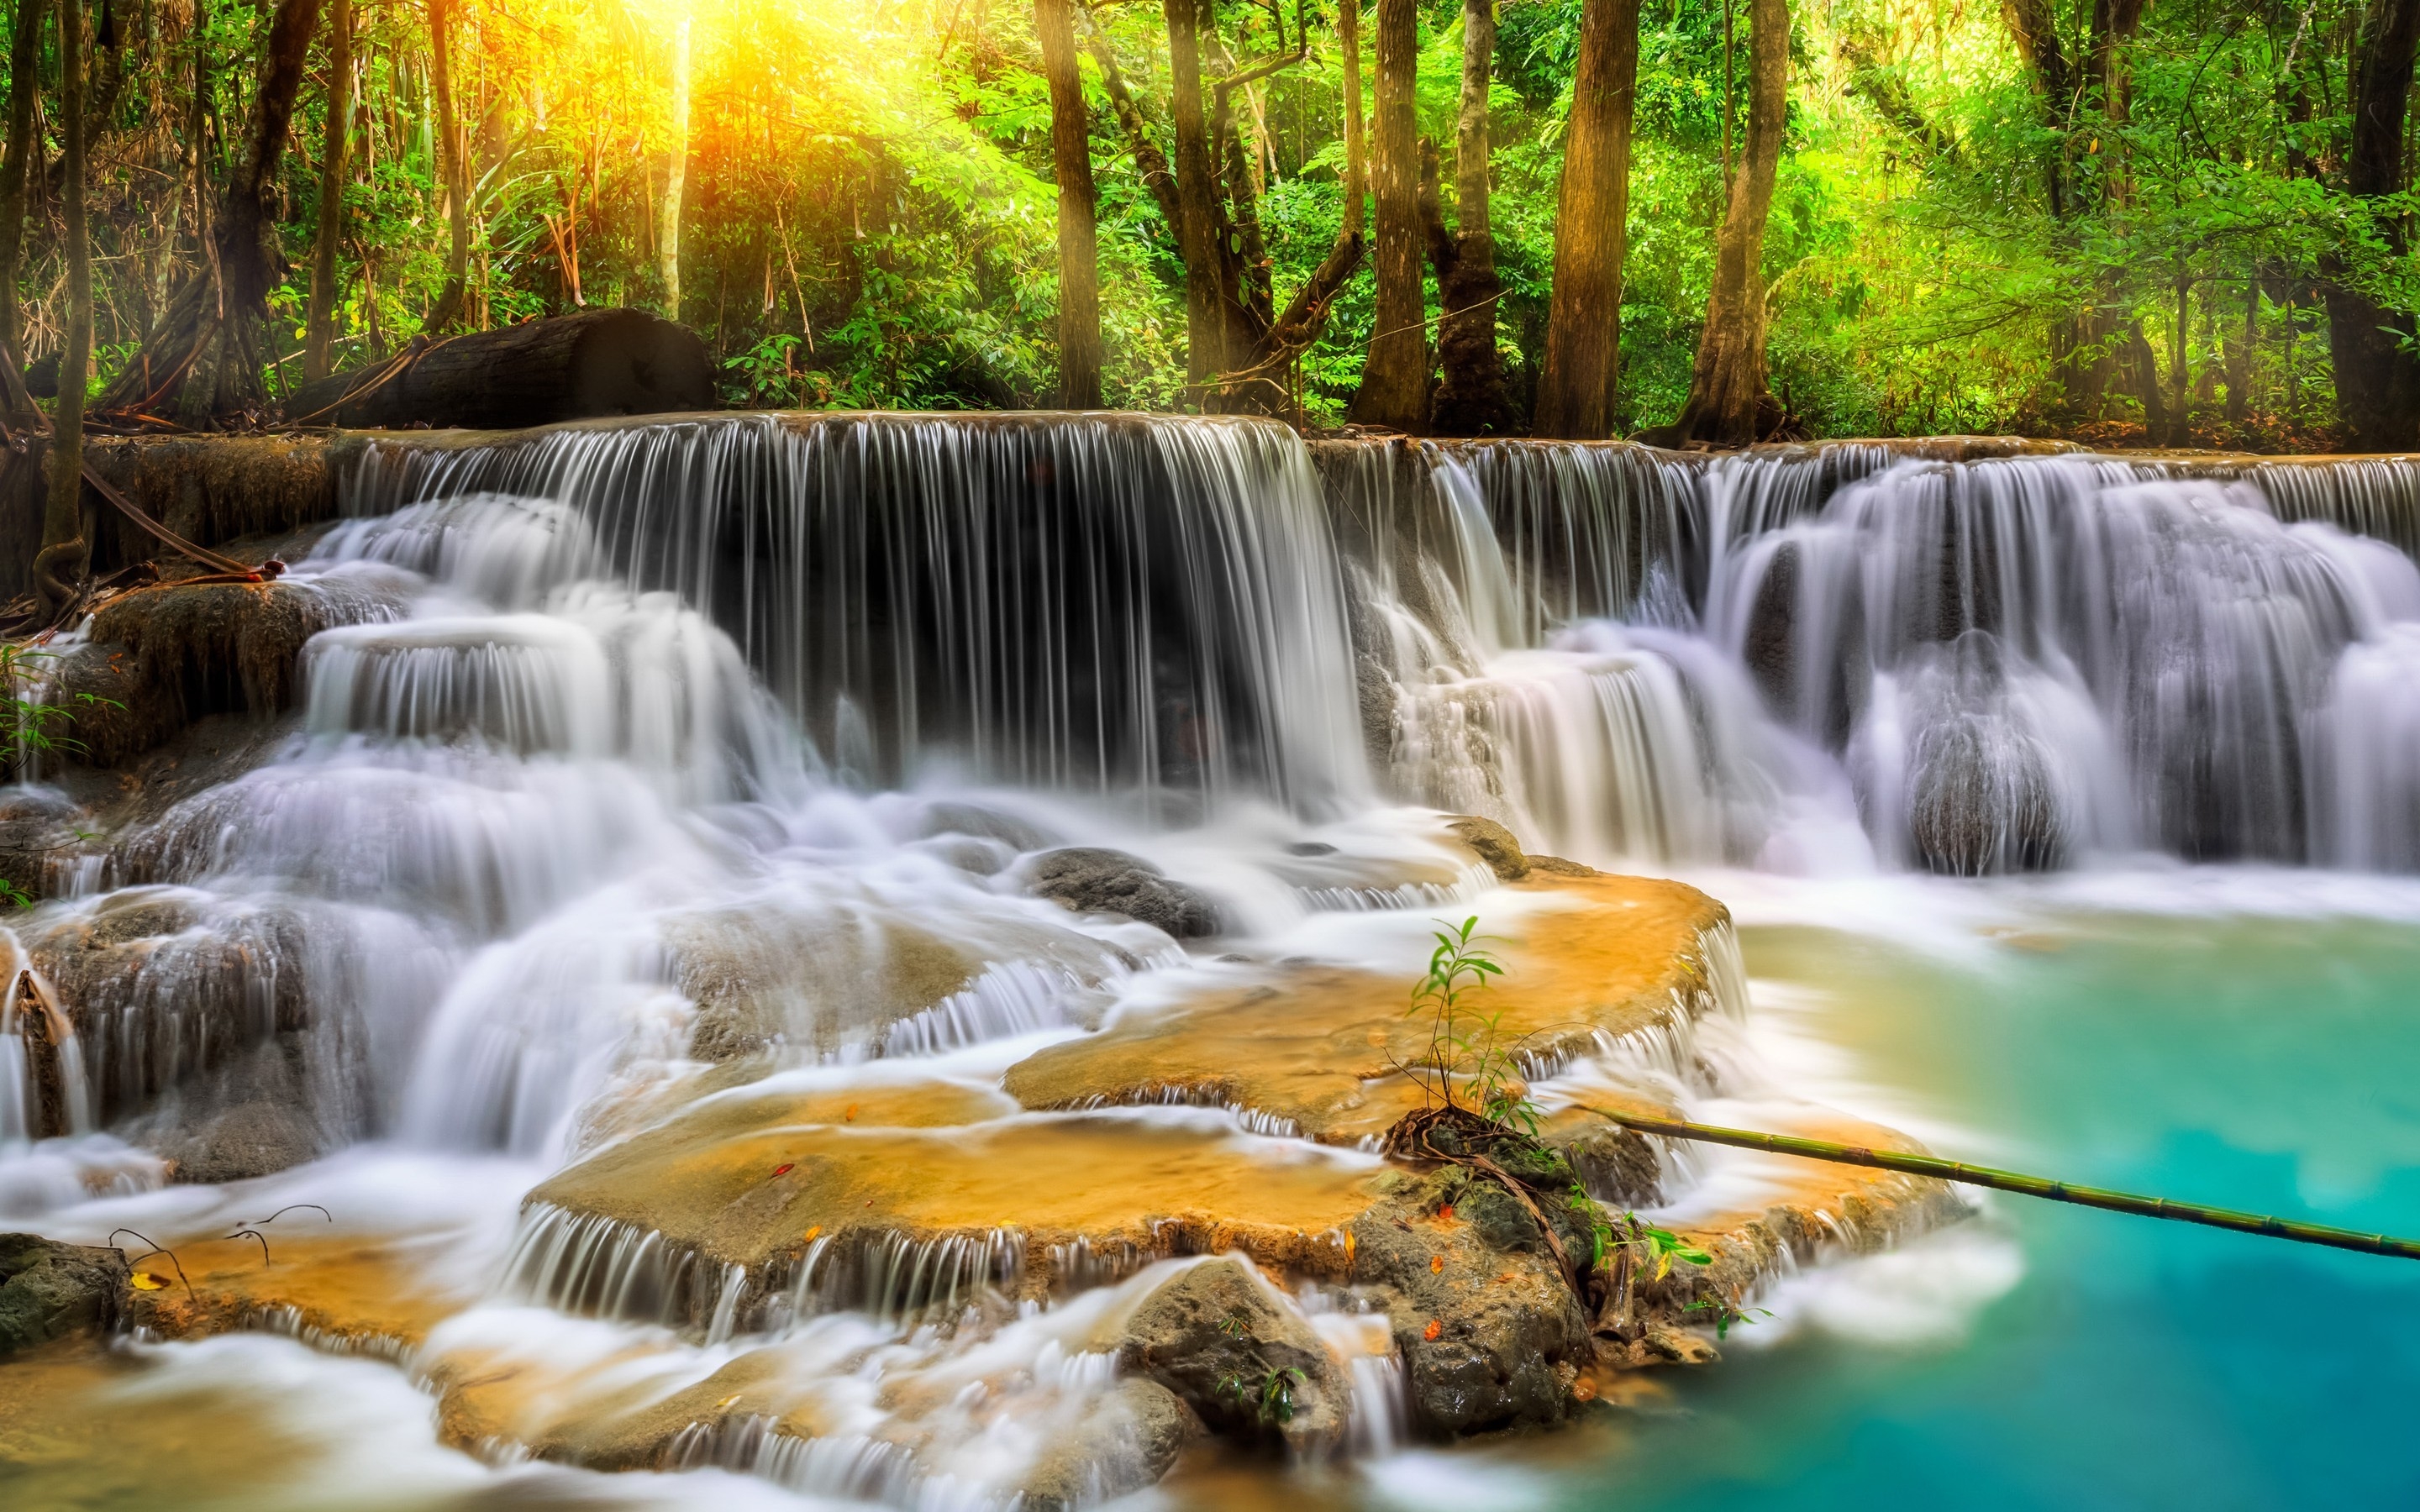 Waterfall in Thailand for 2880 x 1800 Retina Display resolution